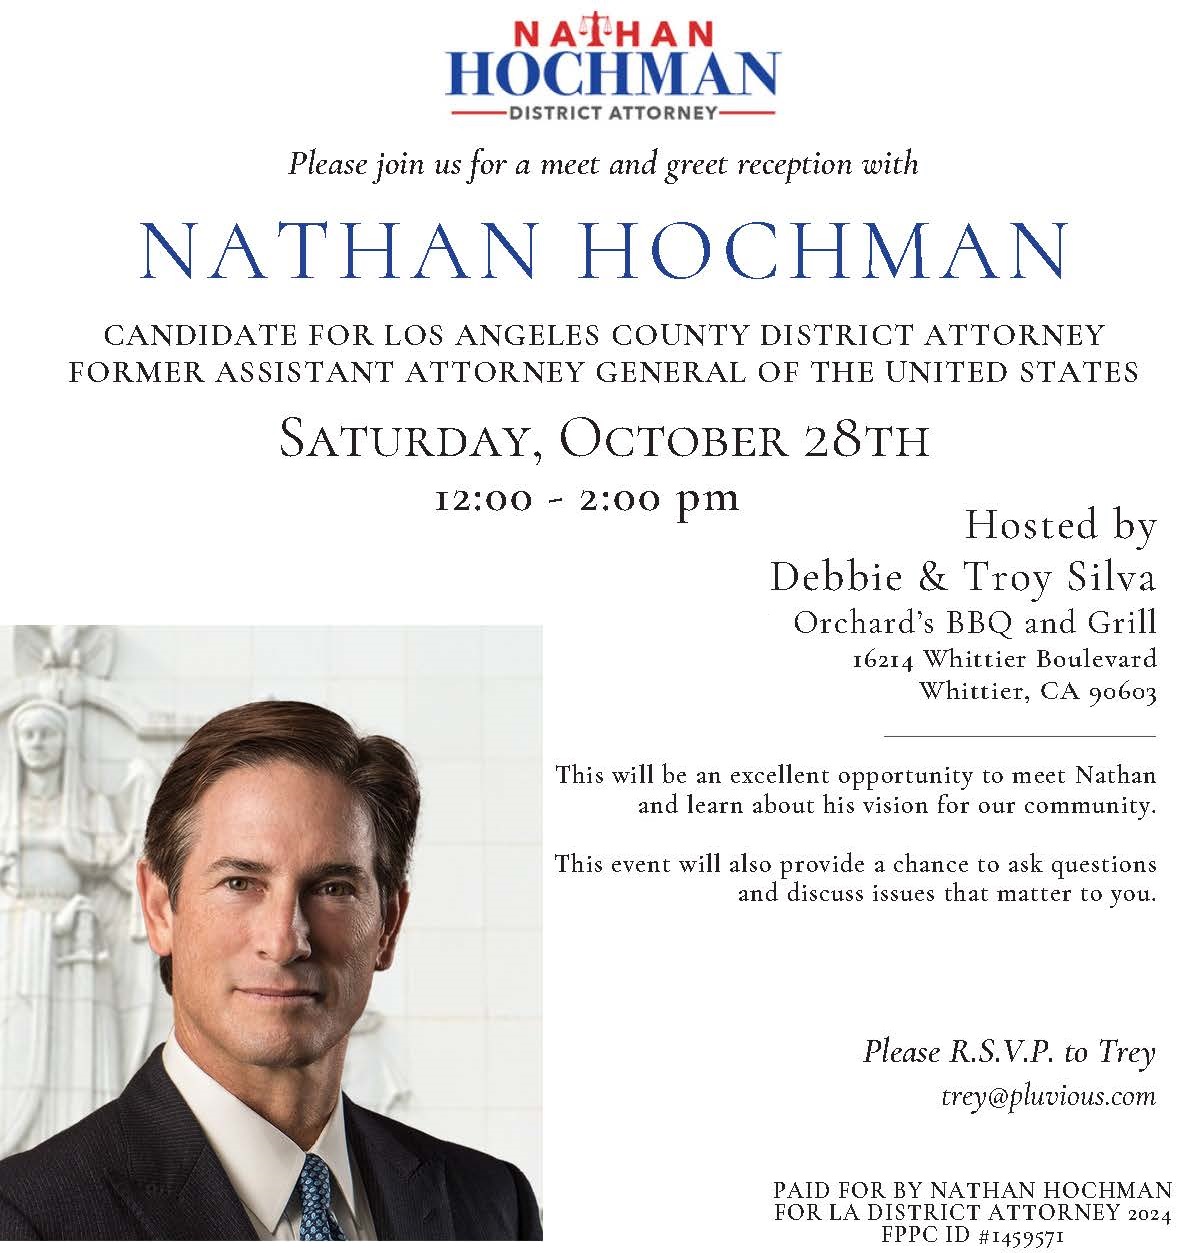 Please join us for a meet and greet reception with Nathan Hochman, the leading candidate for Los Angeles County District Attorney. Saturday, October 28th 12:00 - 2:00 pm Orchard’s BBQ and Grill 16214 Whittier Boulevard Whittier, CA 90603